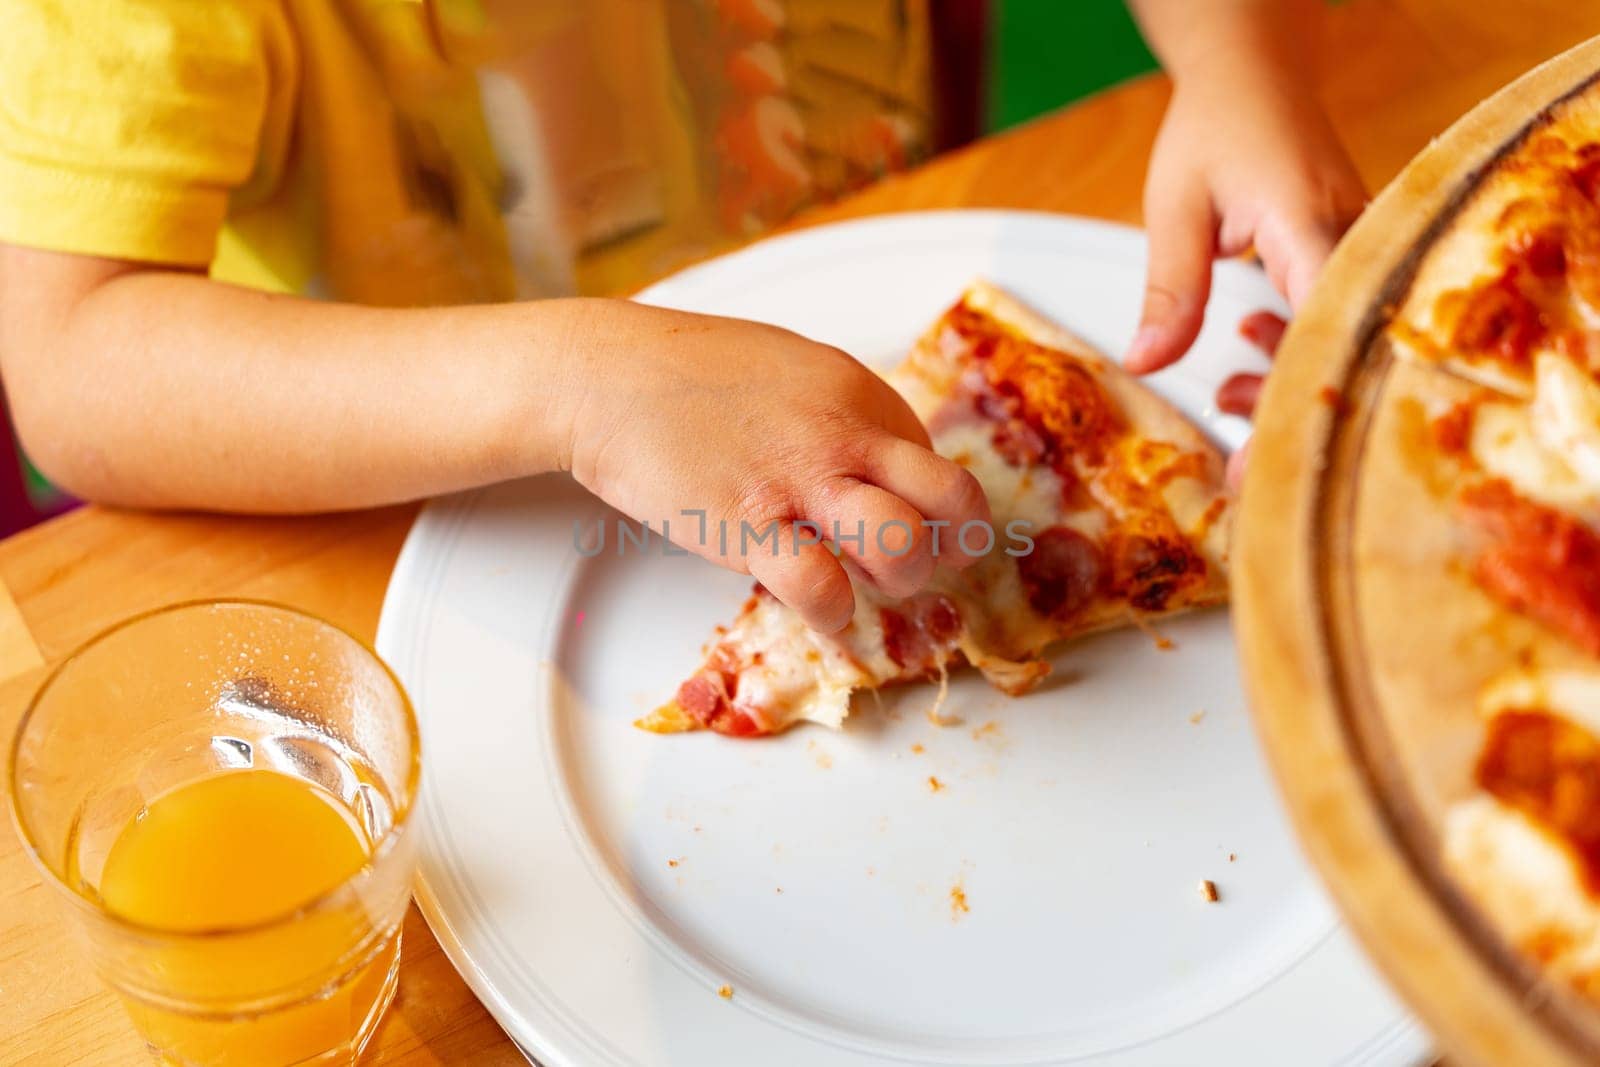 A child sitting at a table, holding a slice of pizza in their hand and taking a bite. The plate is placed in front of them, with pizza toppings visible. The child appears to be enjoying the food.